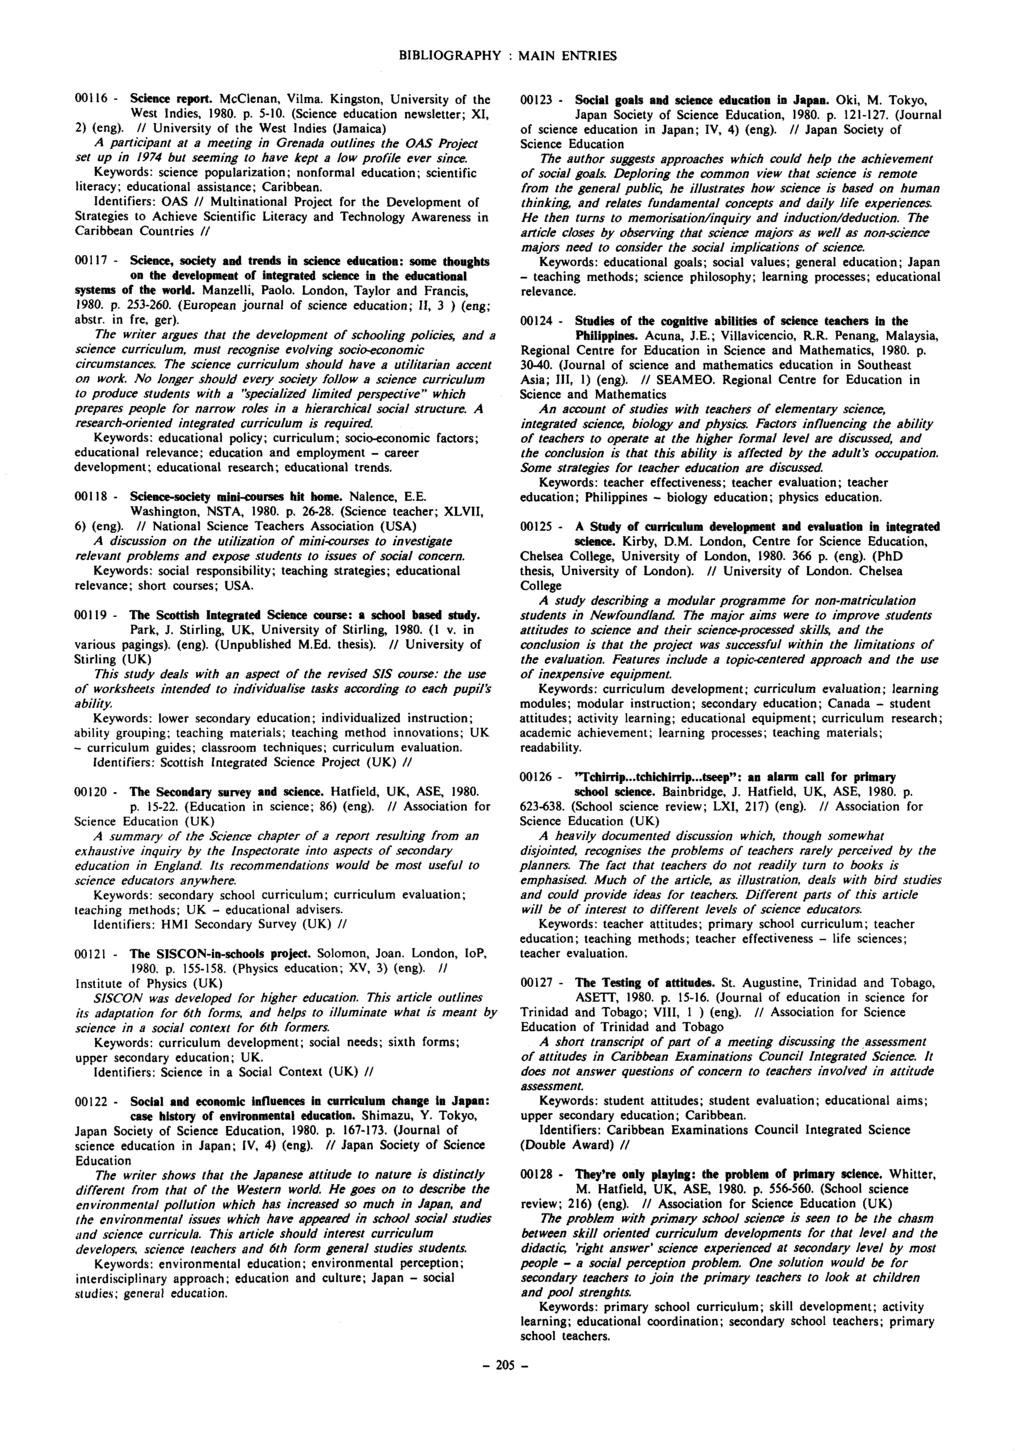 BIBLIOGRAPHY : MAIN ENTRIES 00116 - Science report. McClenan, Vilma. Kingston, University of the West Indies, 1980. p. 5-10. (Science education newsletter; XI, 2) (eng).